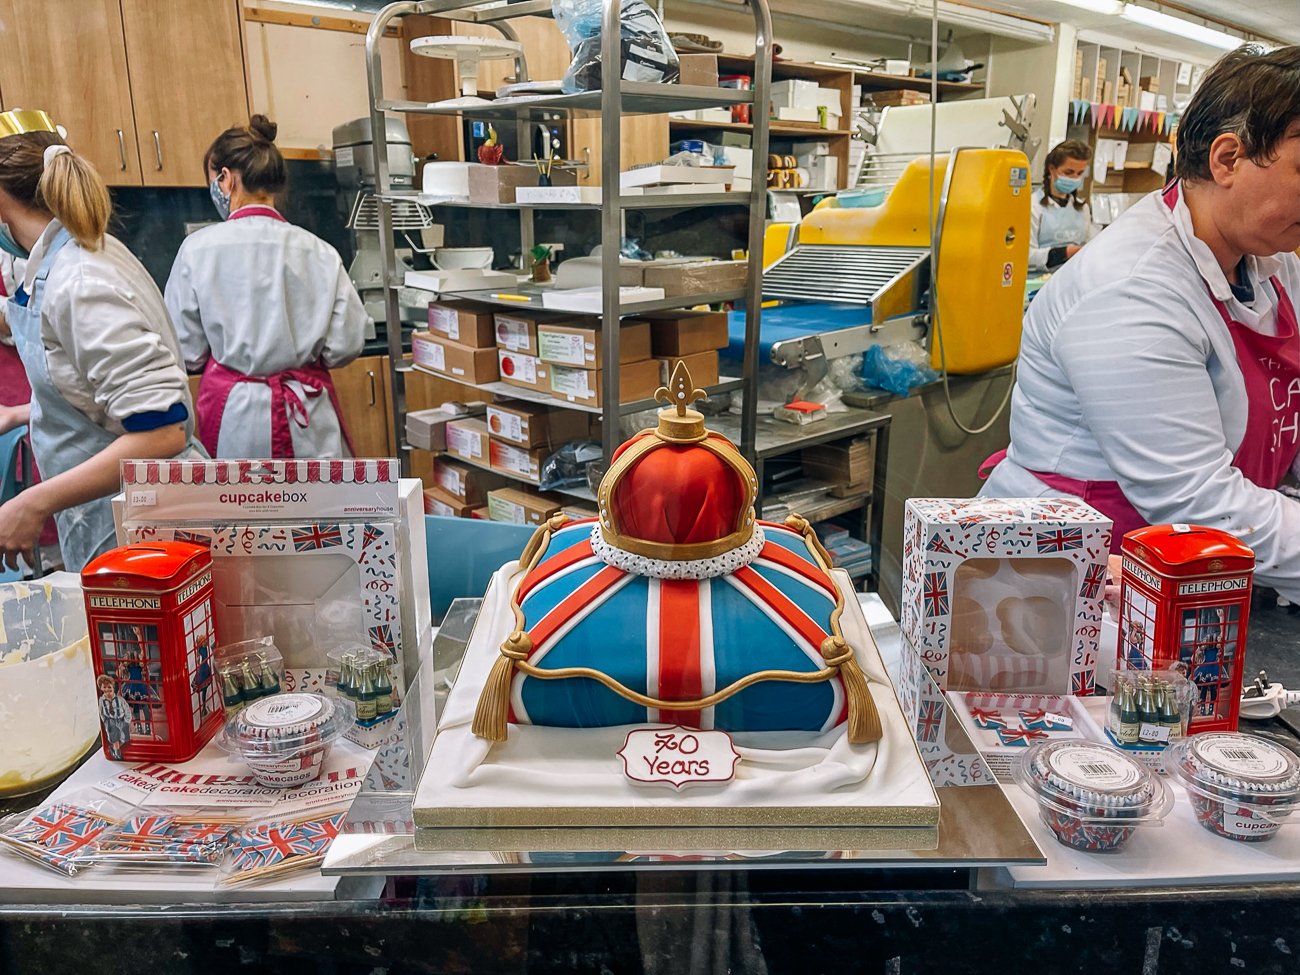 A cake with the UK flag and a red and gold crown on top for the queen's jubilee